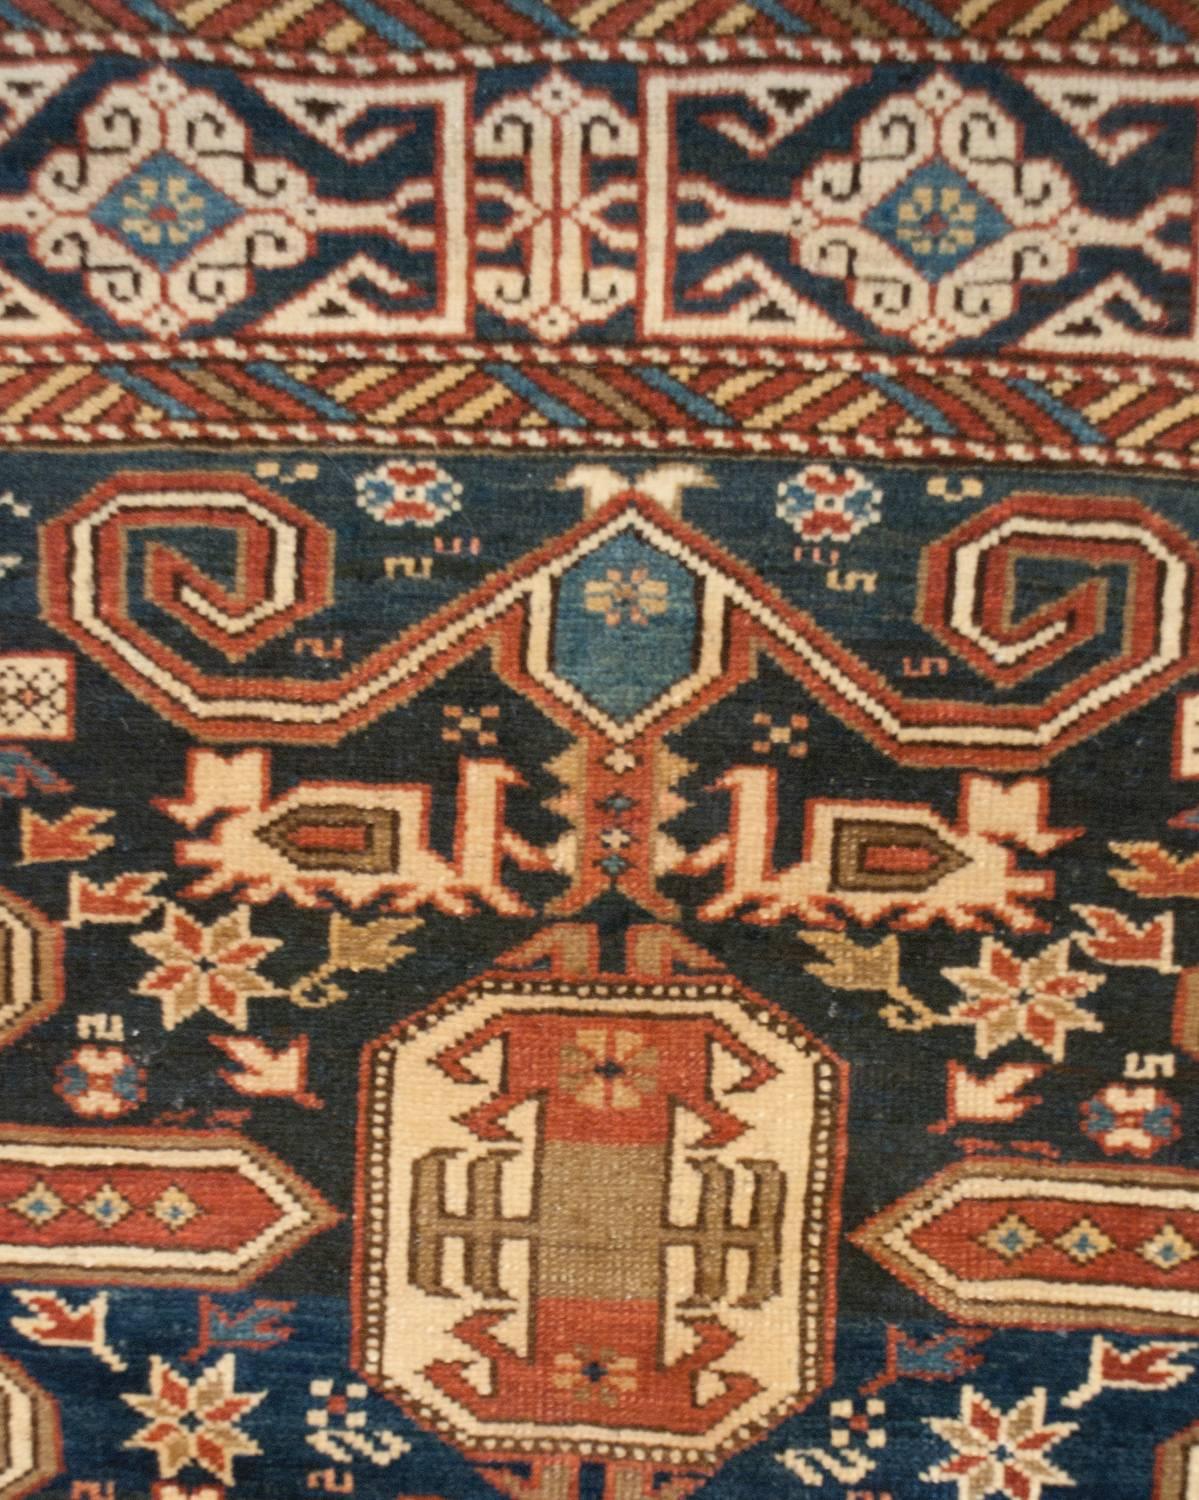 A fascinating late 19th century Caucasian Perpetual rug with an incredible tribal pattern of stylized flowers and leaves, and chickens are expertly woven in crimson, indigo, and natural wools, all on a rich indigo background. The border is